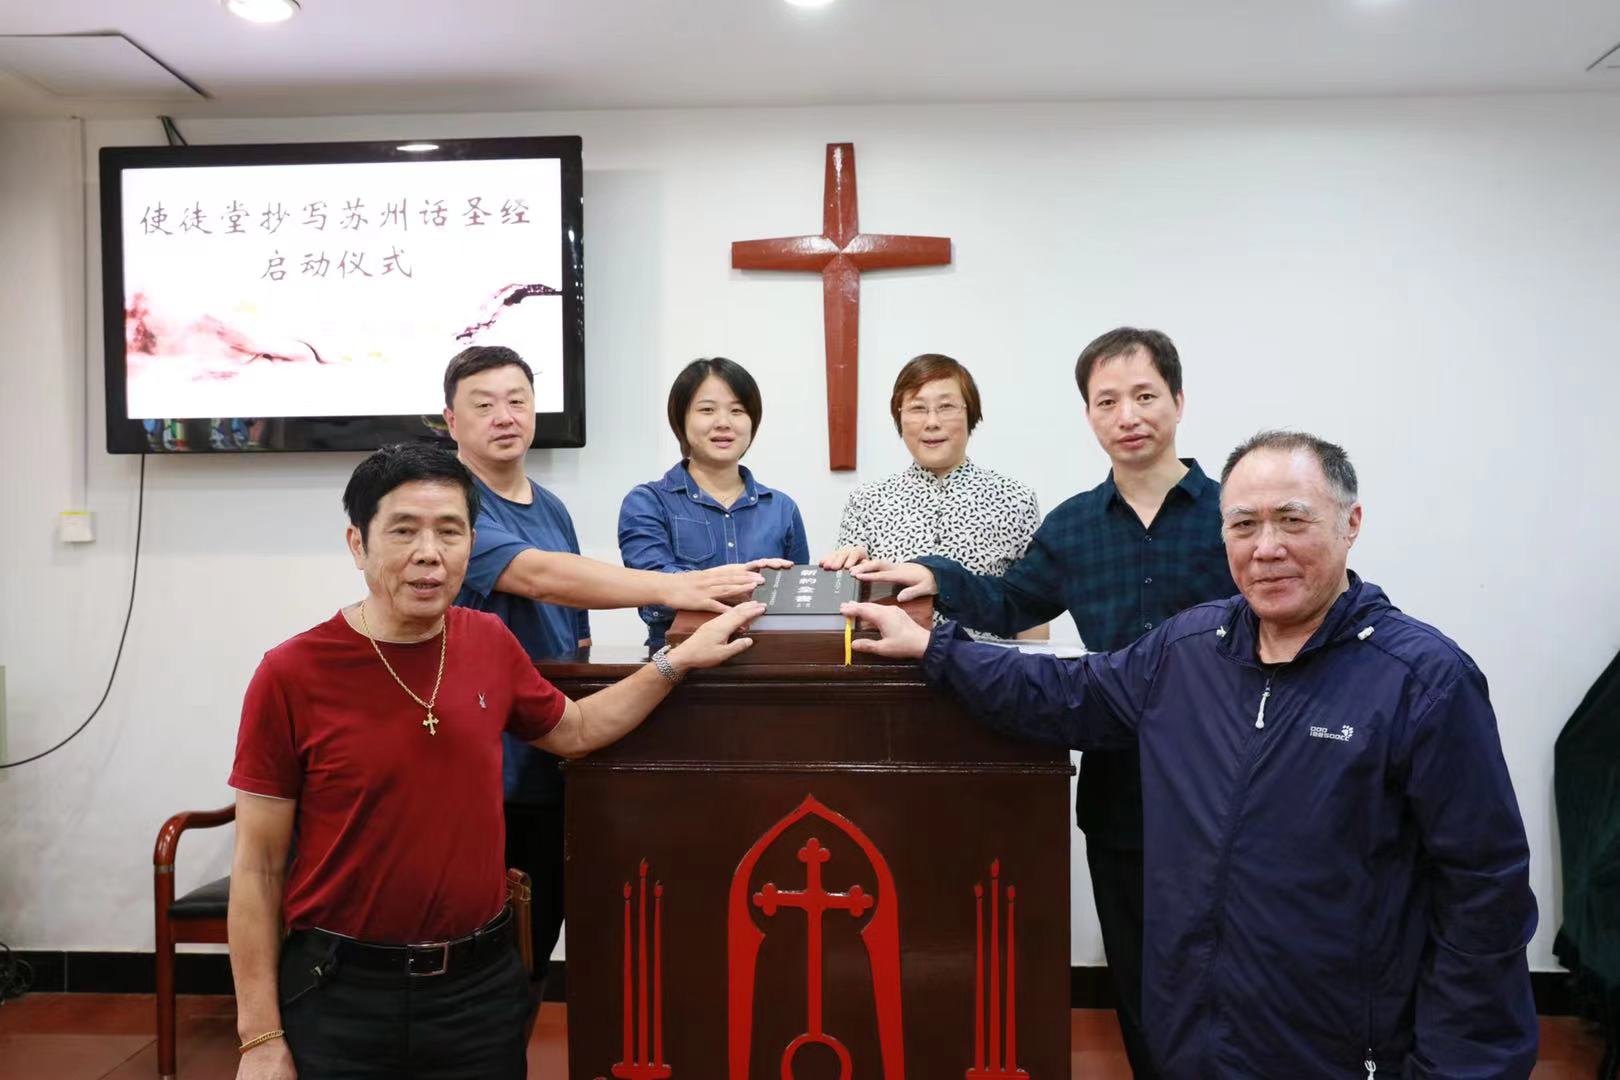 Pastors and transcribers put their hands on the Suzhou dialect version of the Bible in 1881 in Apostle Church in Suzhou, Jiangsu, on October 14, 2021.